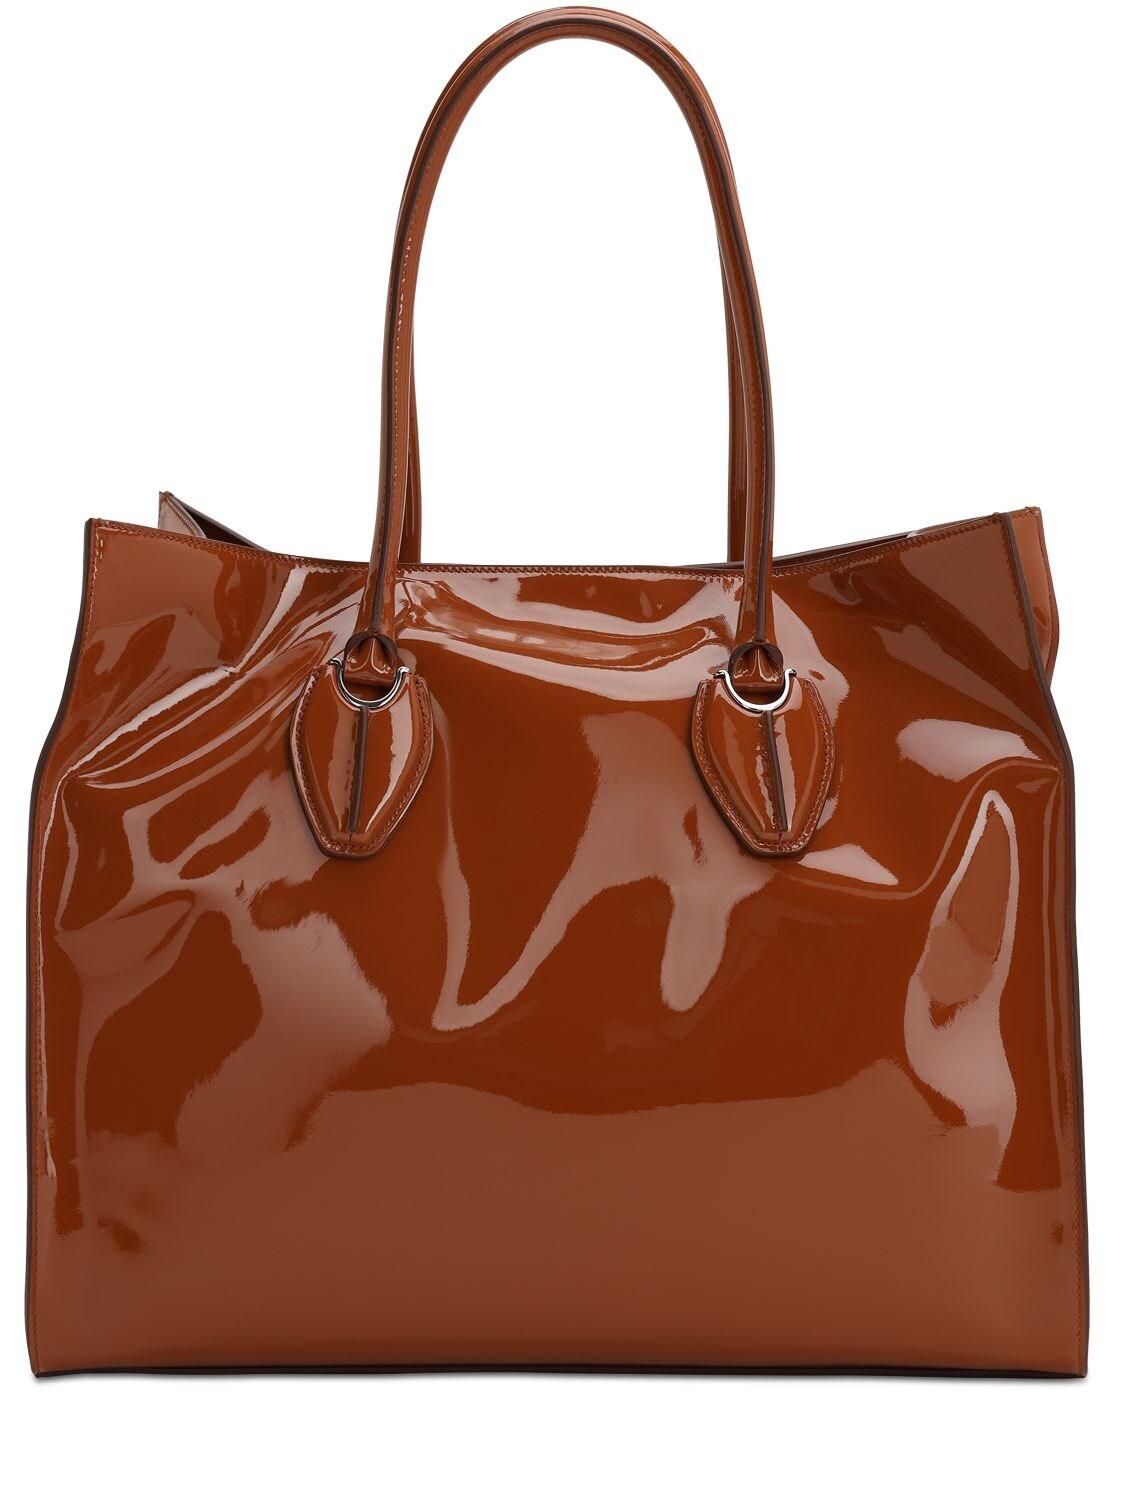 Tod's Patent Leather Tote Bag in Brown